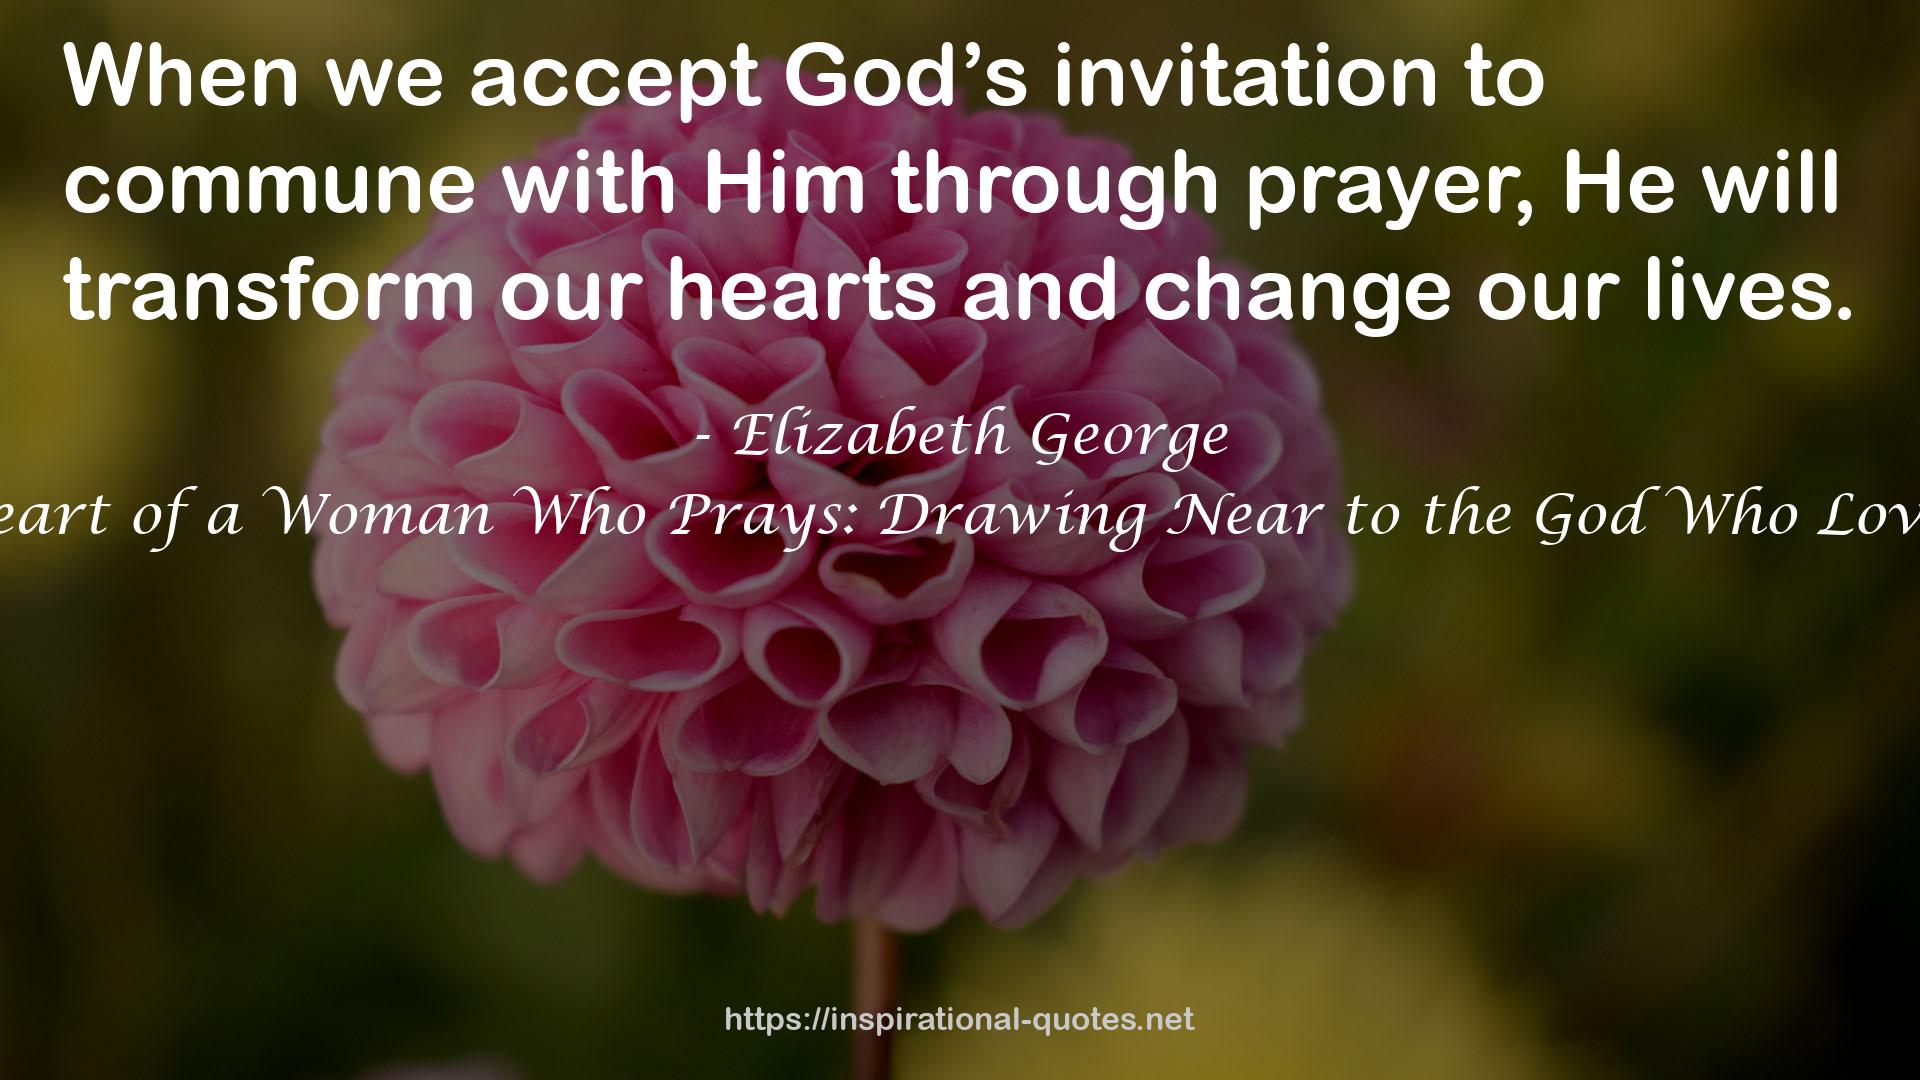 The Heart of a Woman Who Prays: Drawing Near to the God Who Loves You QUOTES